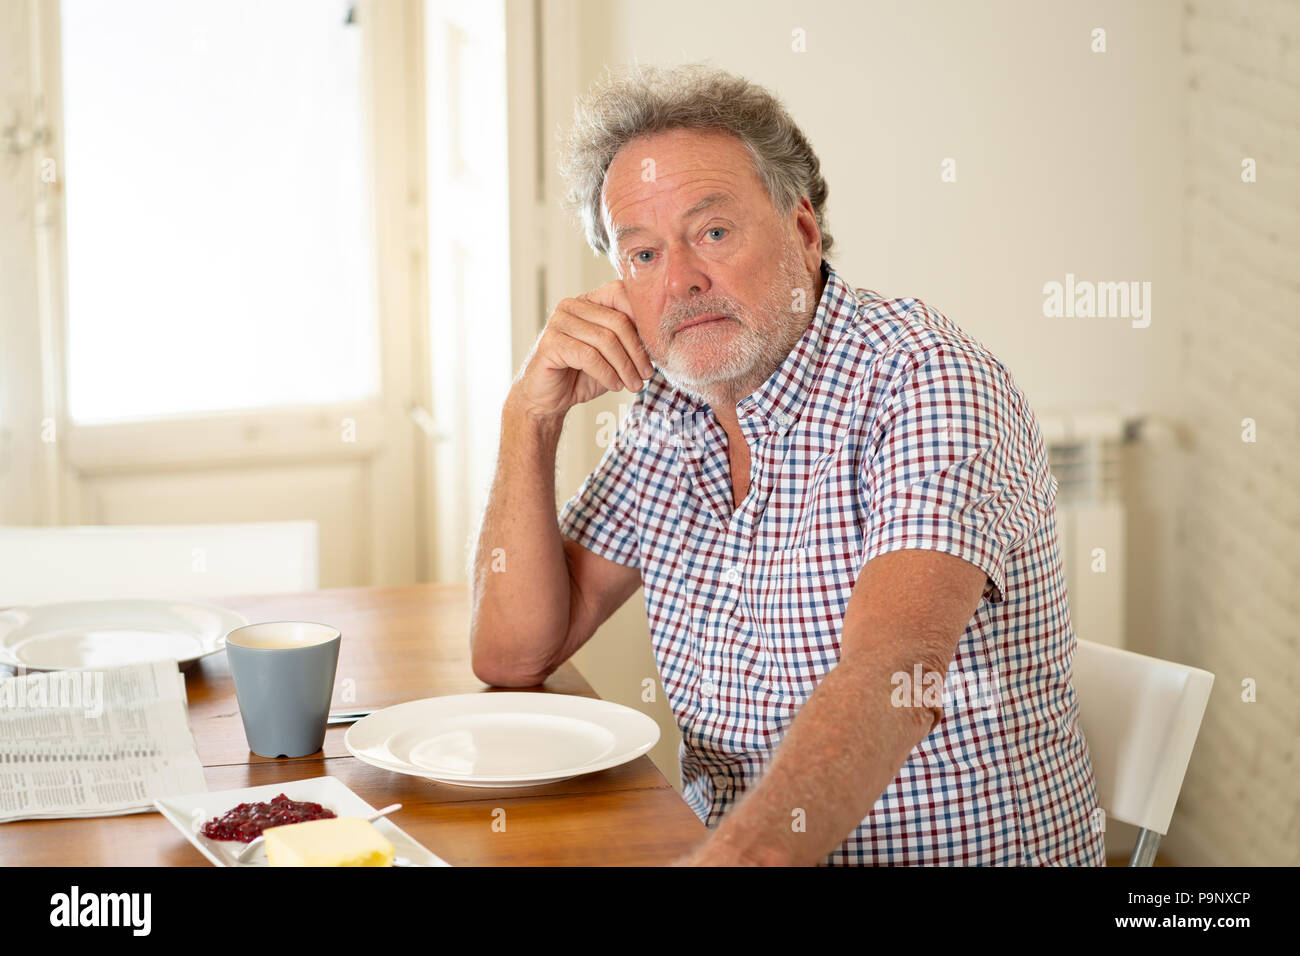 Portrait of depressed senior old man with grey hair reading the newspaper while having breakfast and drinking a coffee in old age retirement concept. Stock Photo